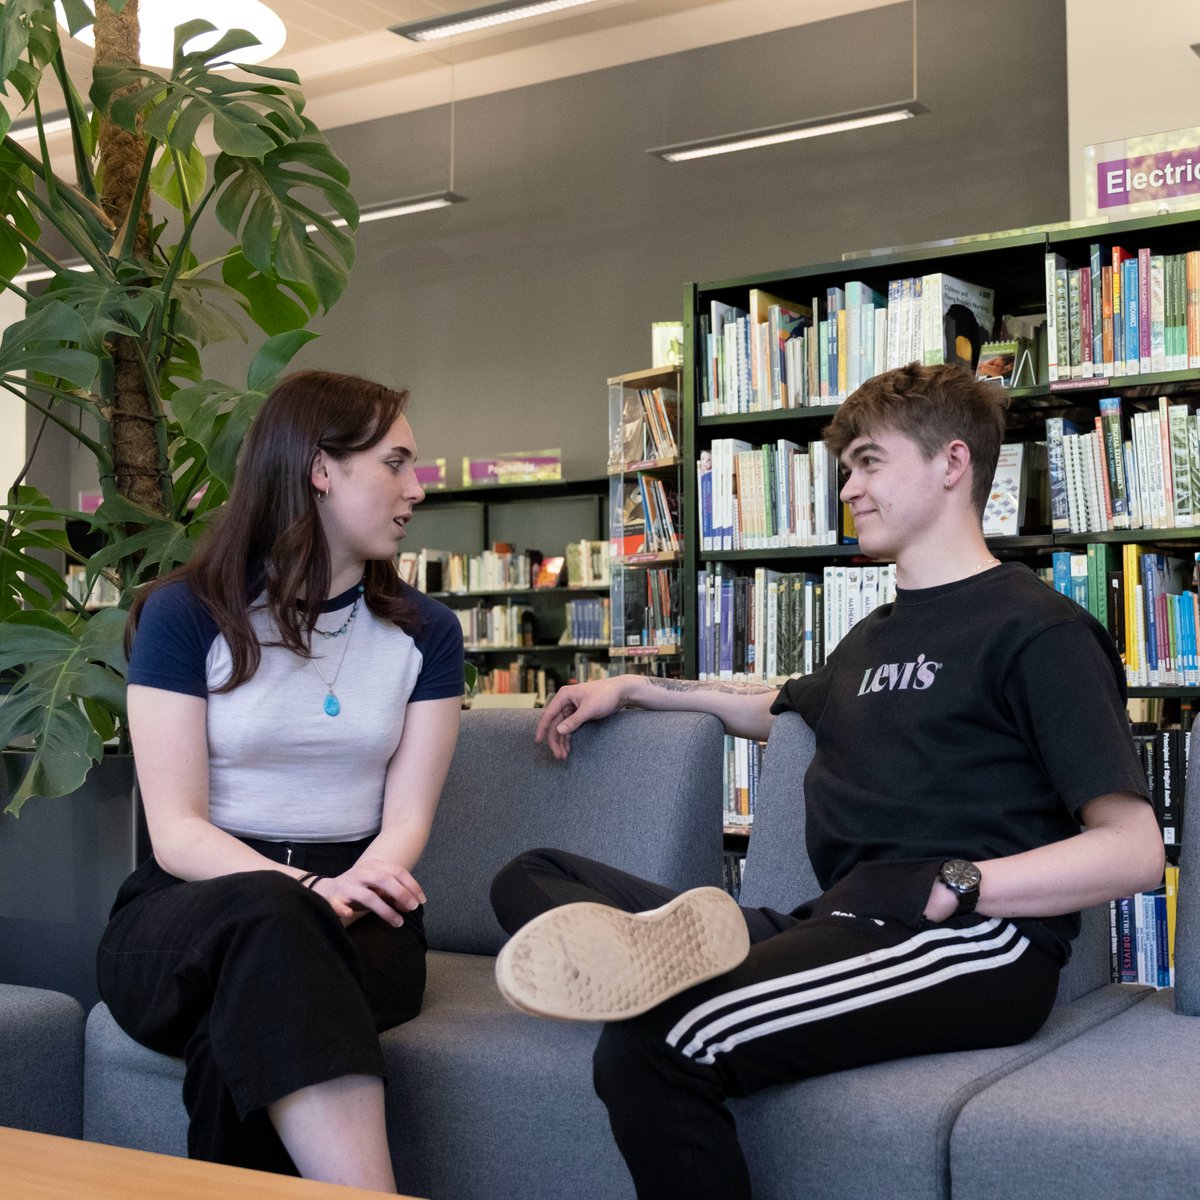 Thinking of your next steps after school? Or want to get into college and try student life but don't know where to start? NQ Get Ready for College and Work aims to give you the confidence and qualifications to start your college journey. Find out more at: bit.ly/41ckmtX